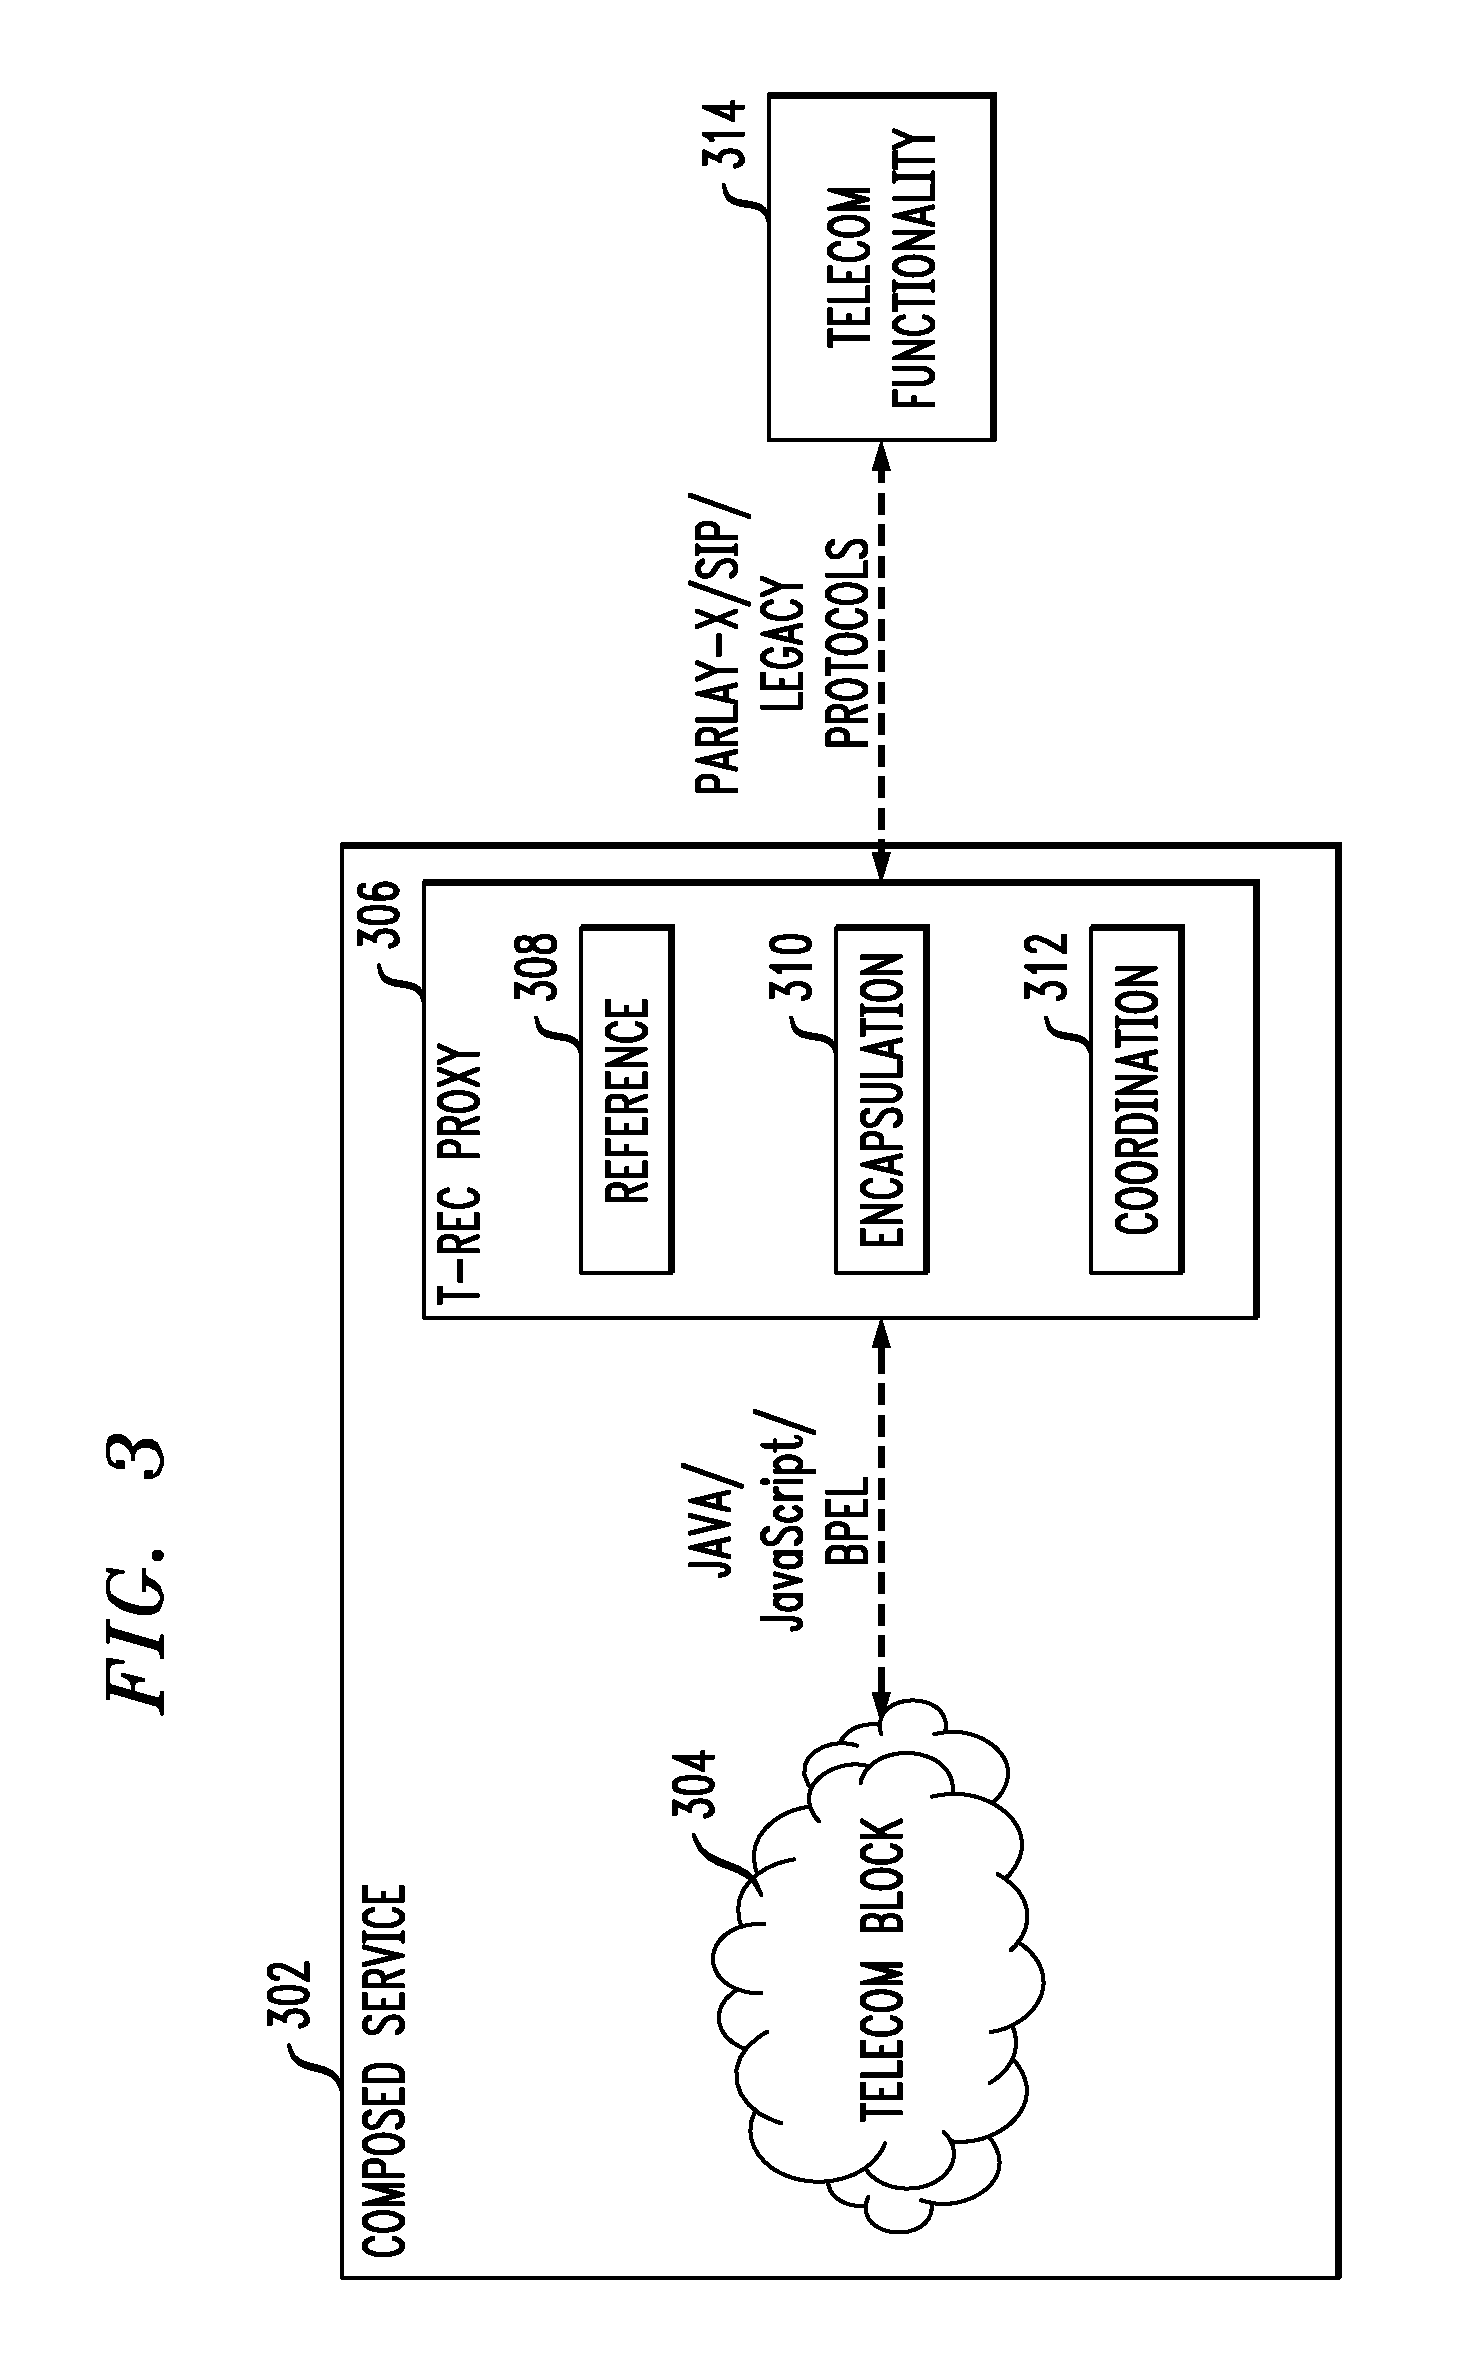 Method For Creating A Telecommunications Application